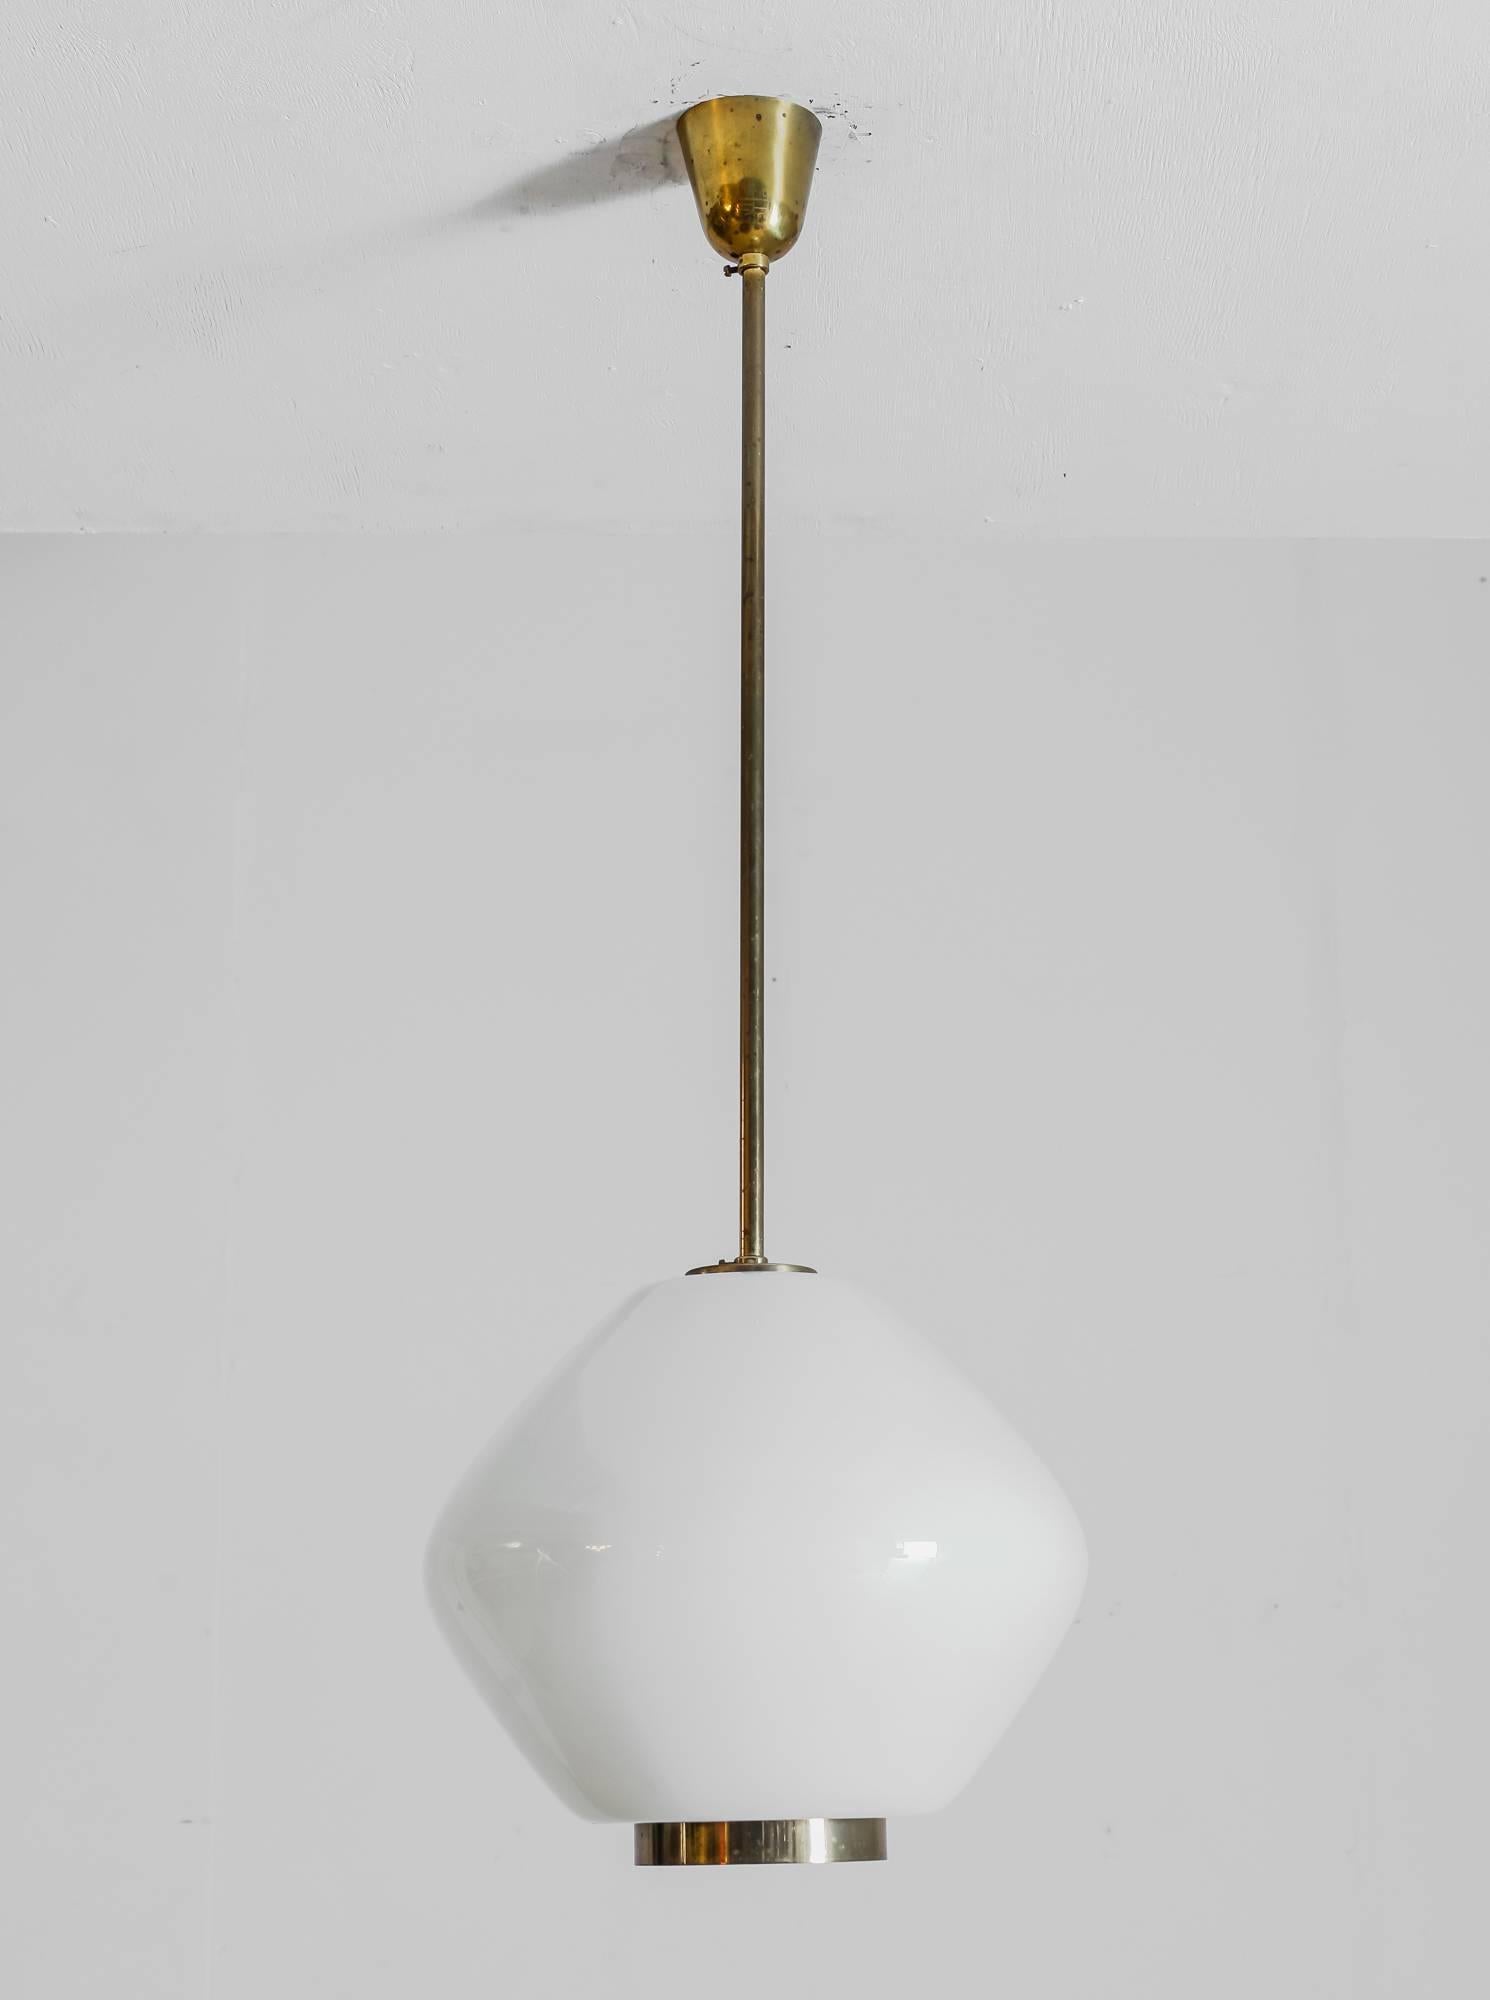 A rare Paavo Tynell pendant made of opaline glass for Idman. The lamp has a brass stem and a brass ring around the opening underneath.
This lamp is marked by Idman and in a very good condition. The brass has a lovely patina.